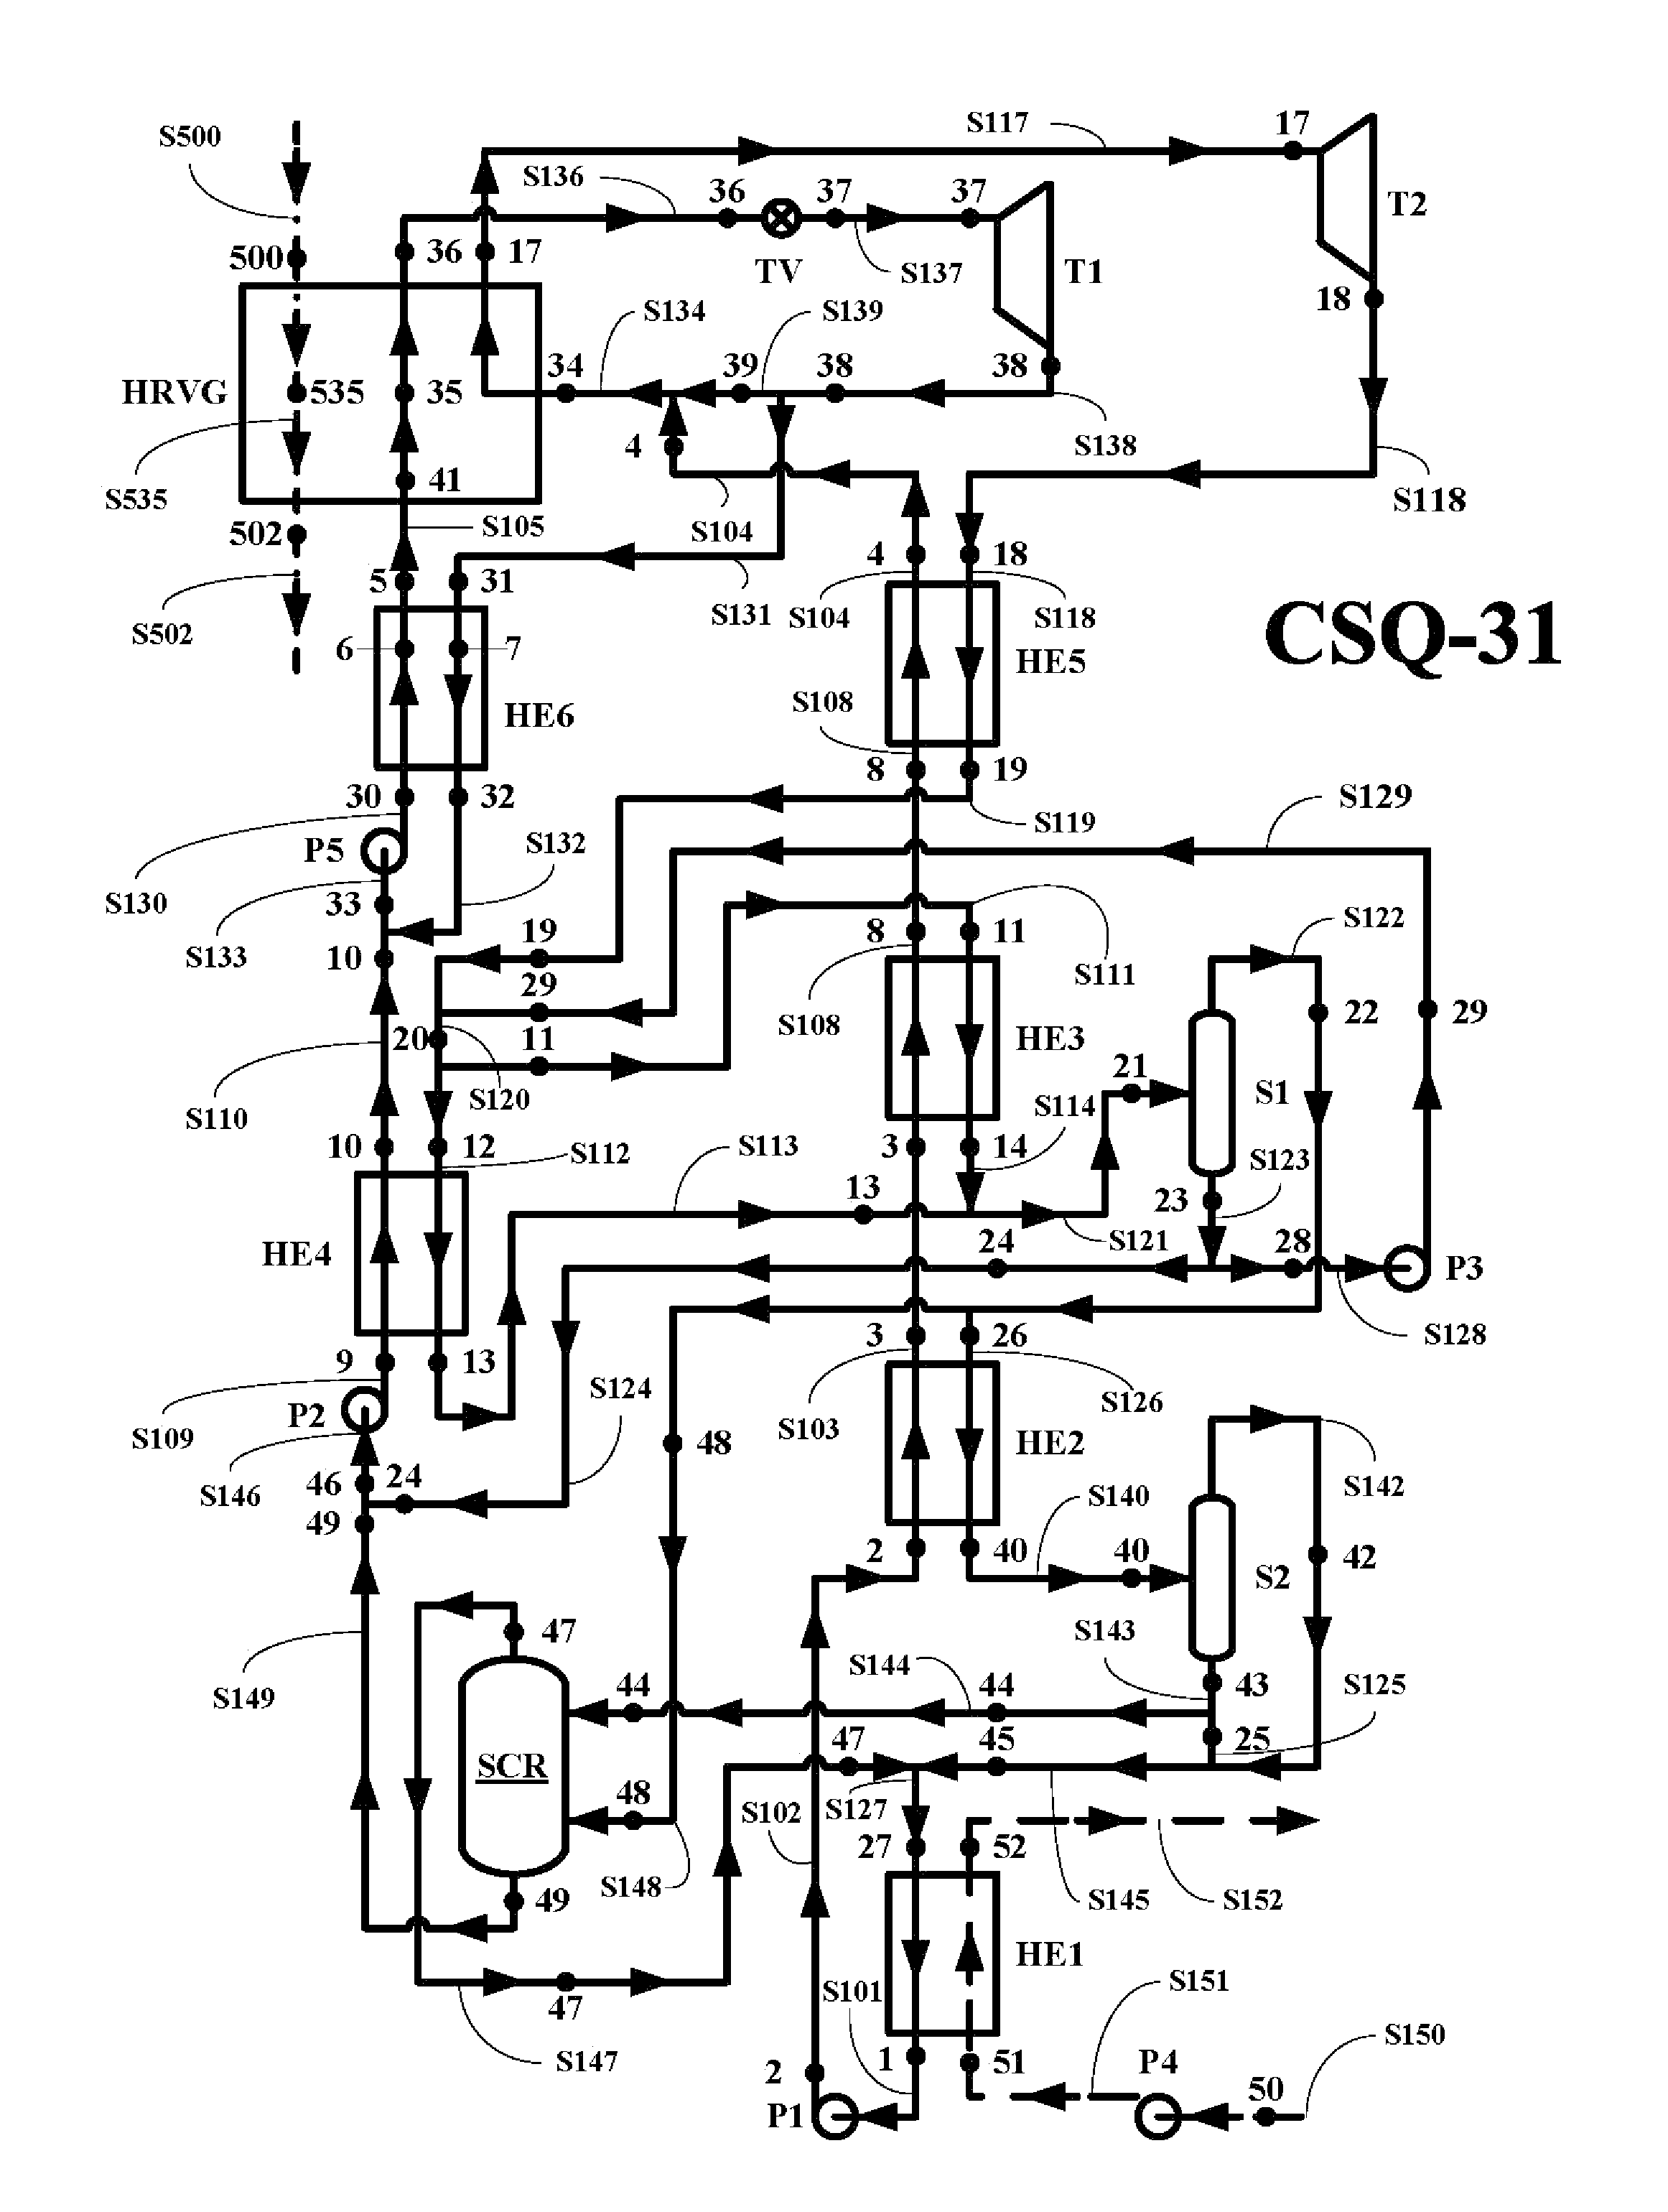 Systems, methods and apparatuses for converting thermal energy into mechanical and electrical power